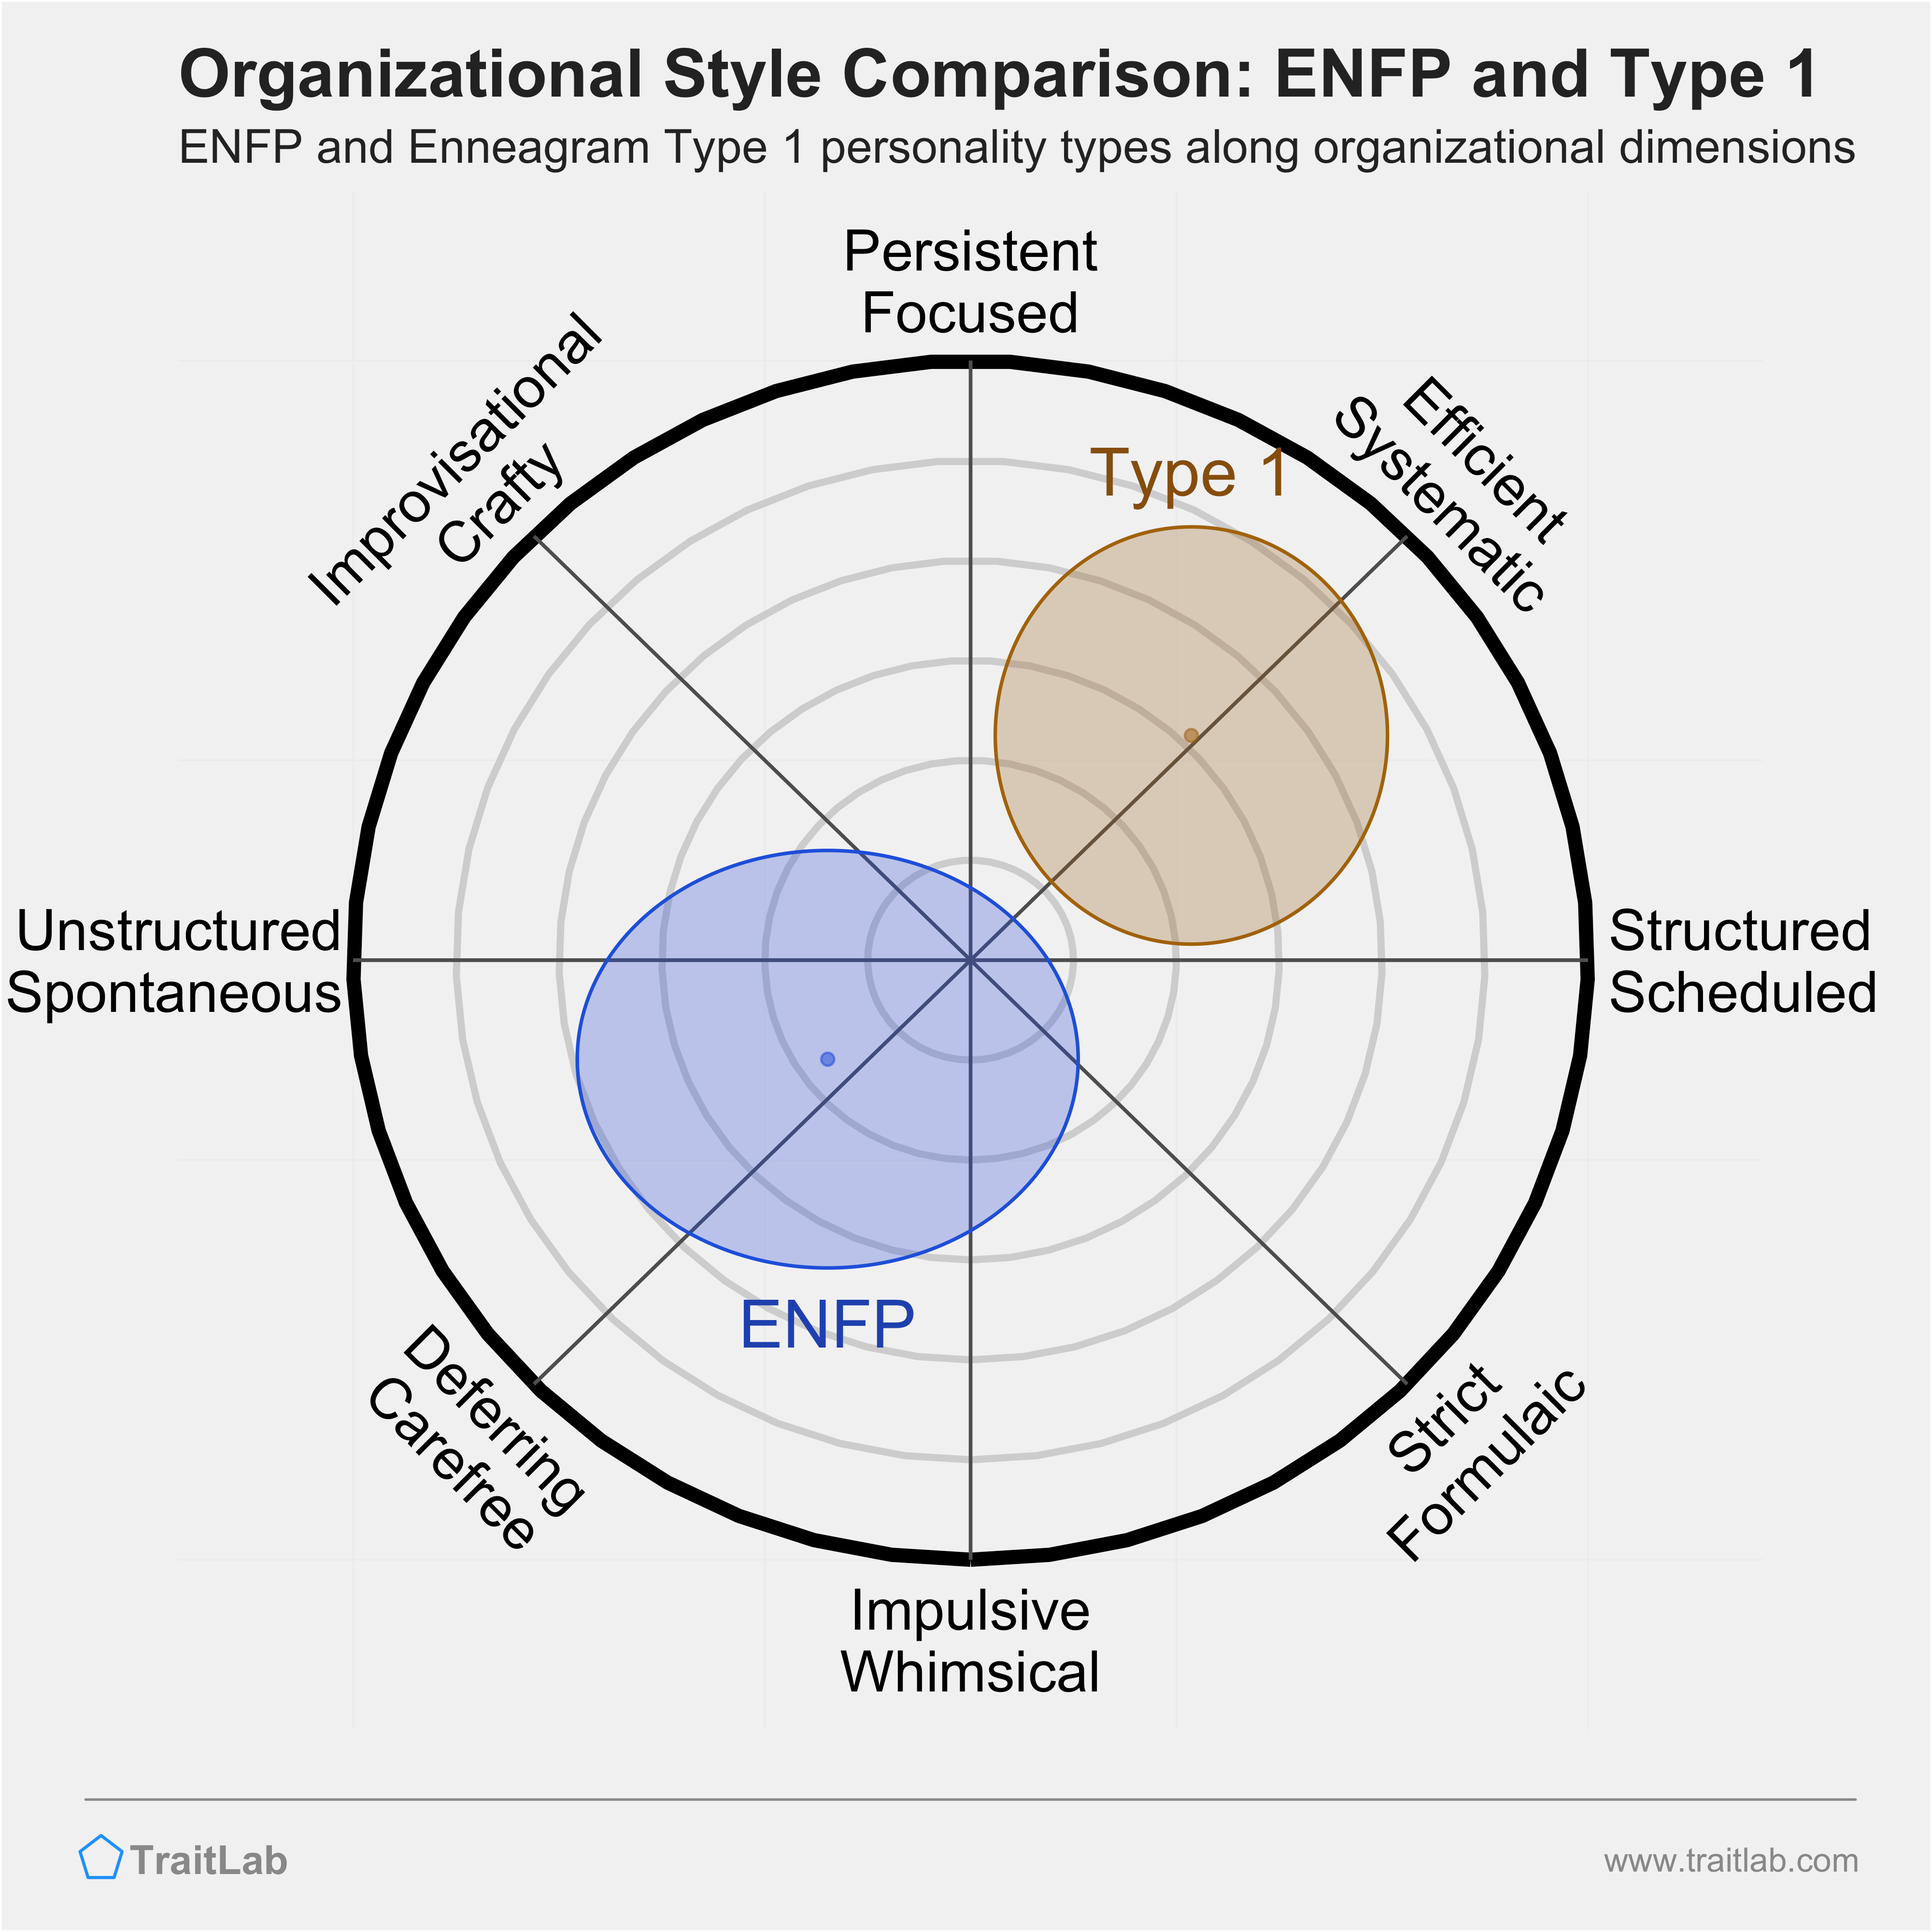 ENFP and Type 1 comparison across organizational dimensions